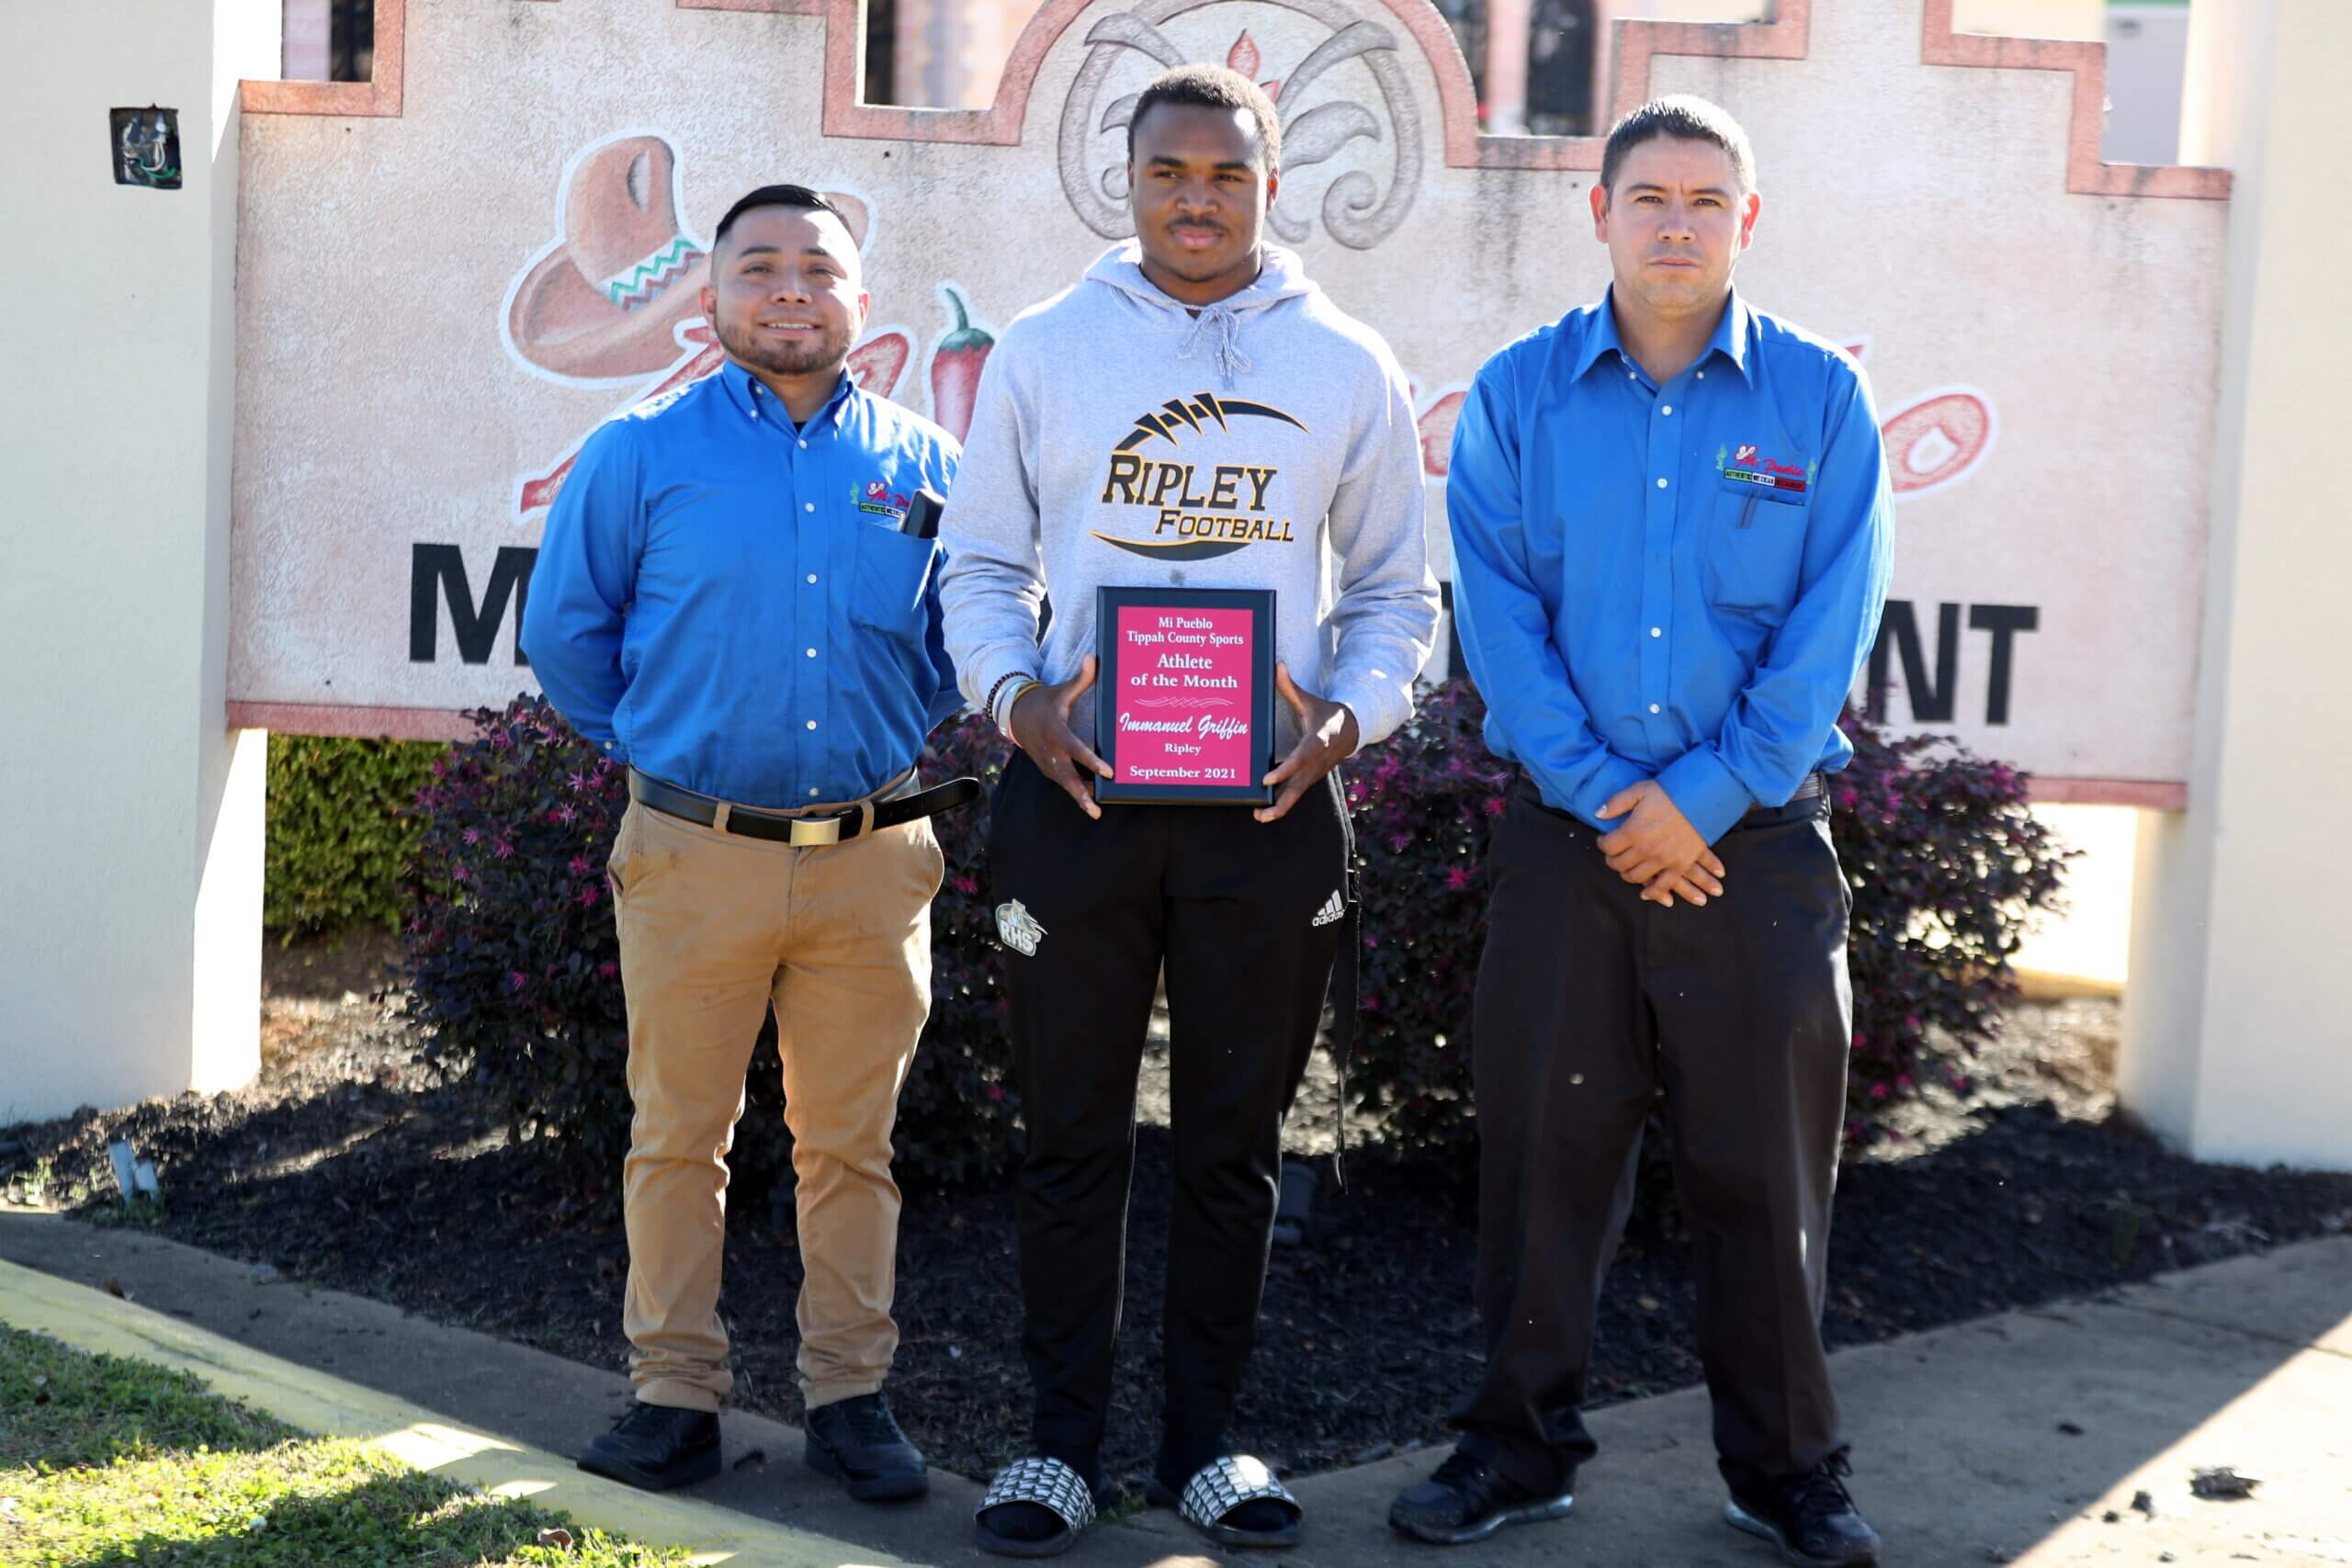 September 2021 Athlete of the Month presented by Mi Pueblo is Ripley's Immanuel Griffin